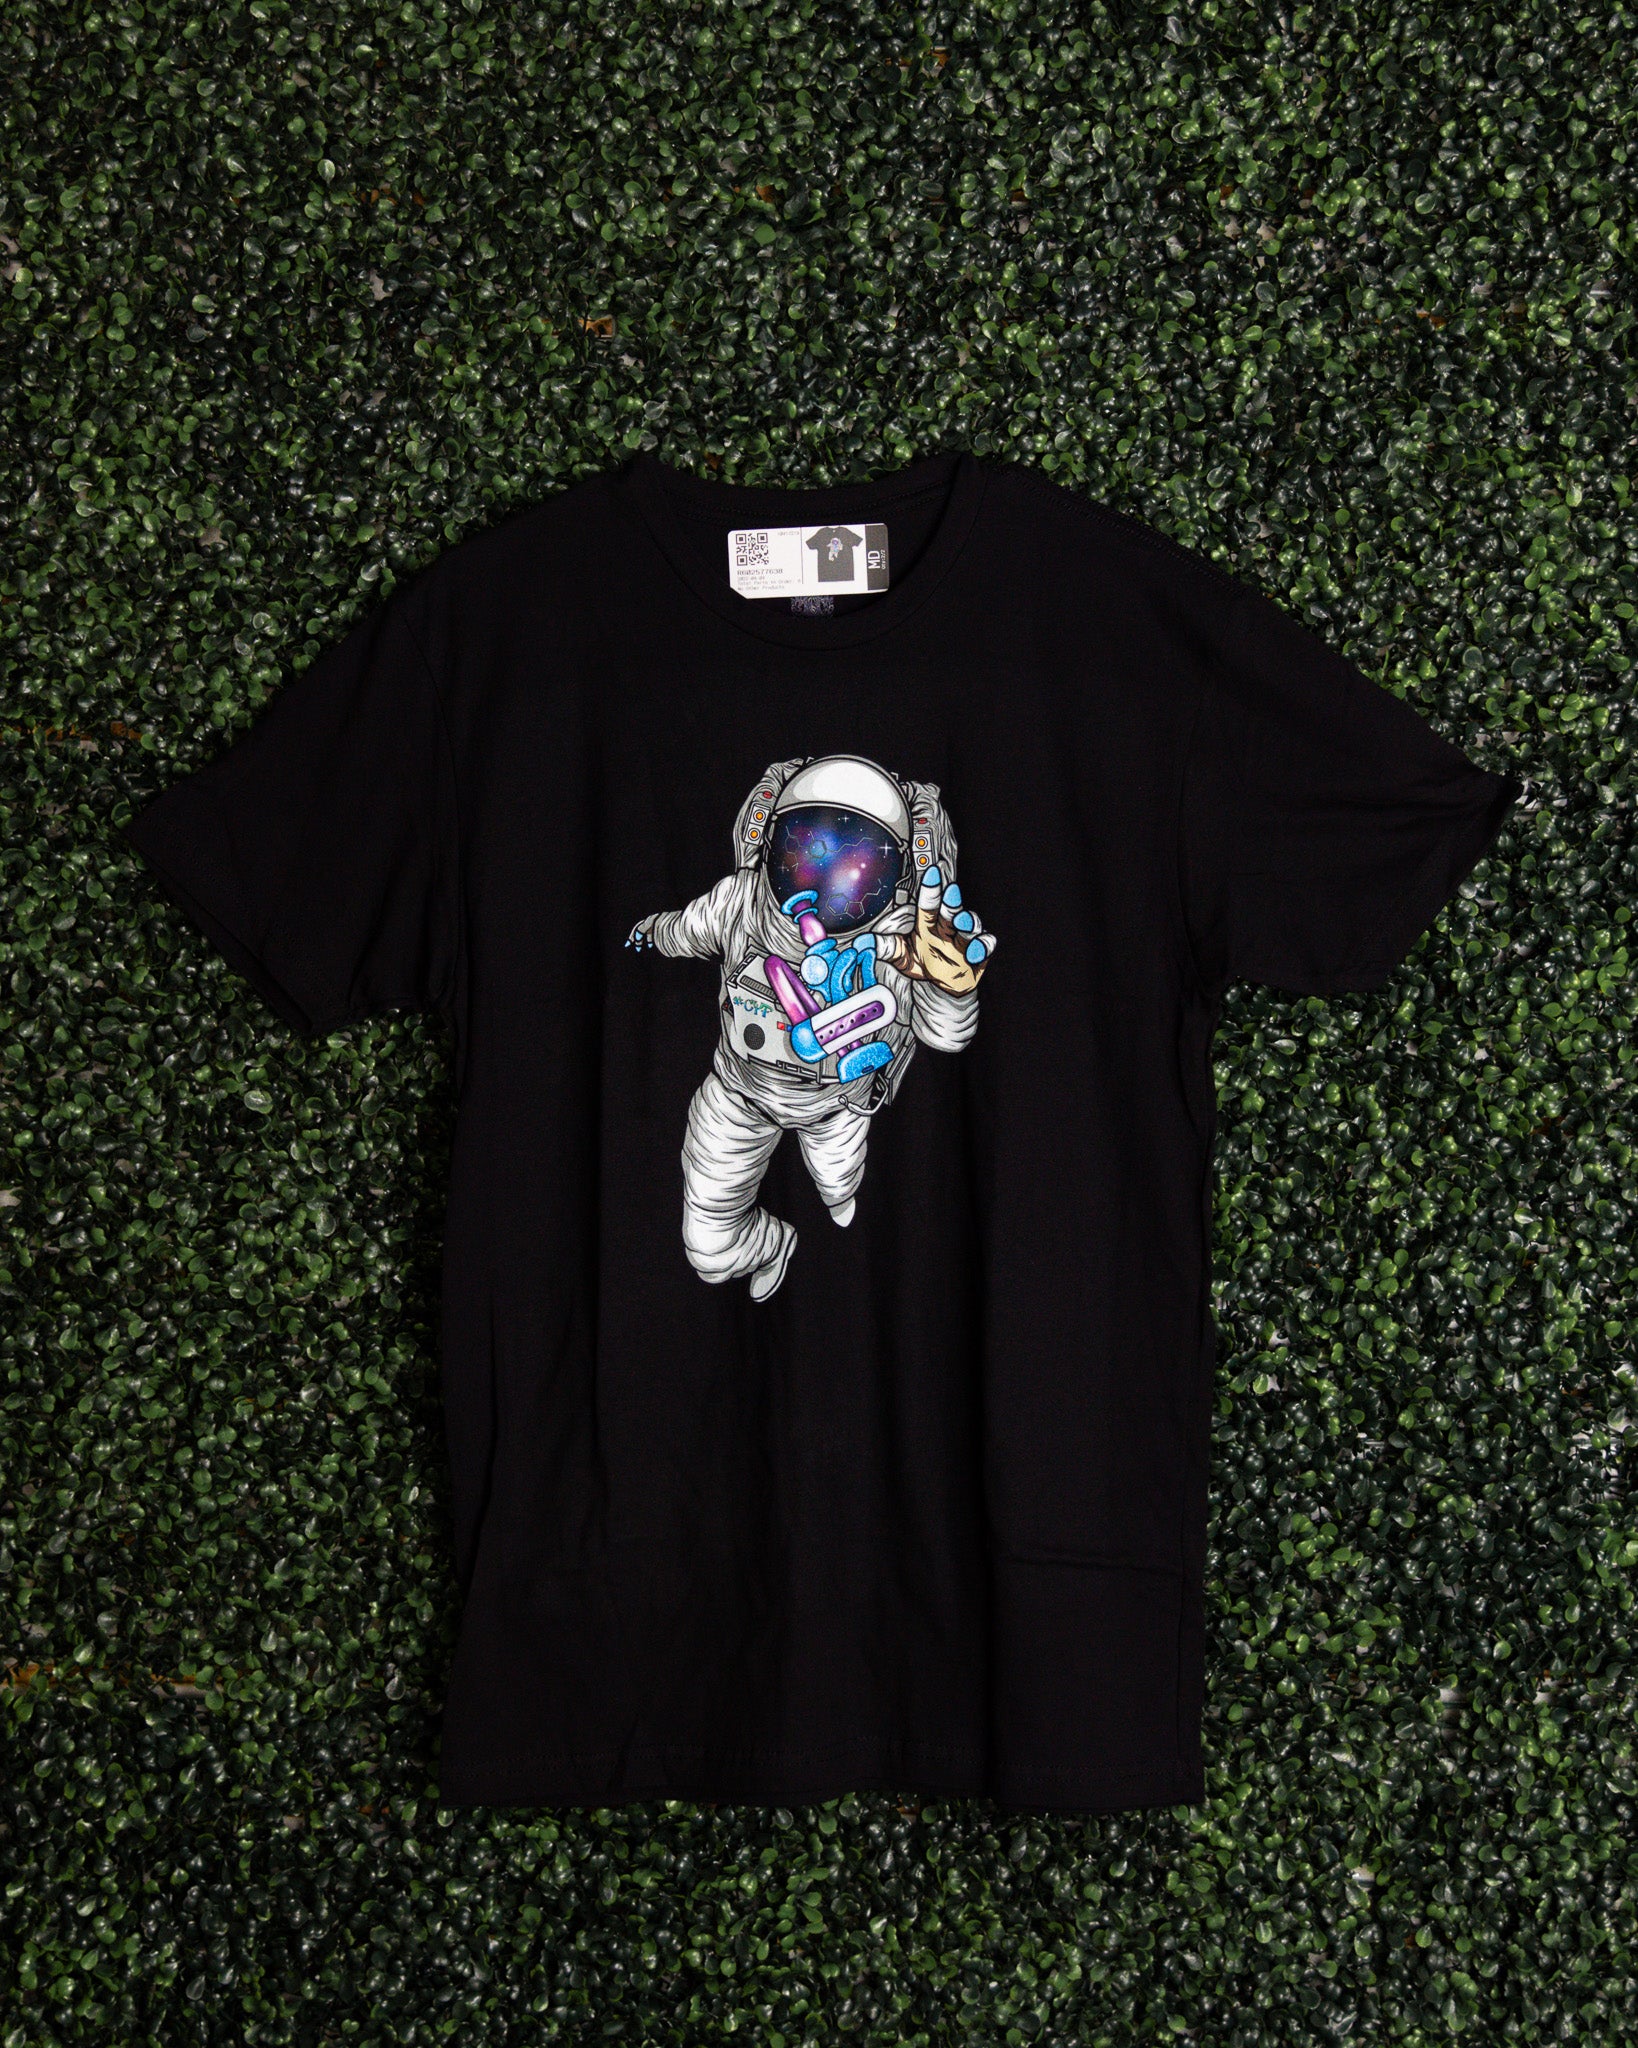 Call Your Fam - Spaceman T-Shirt